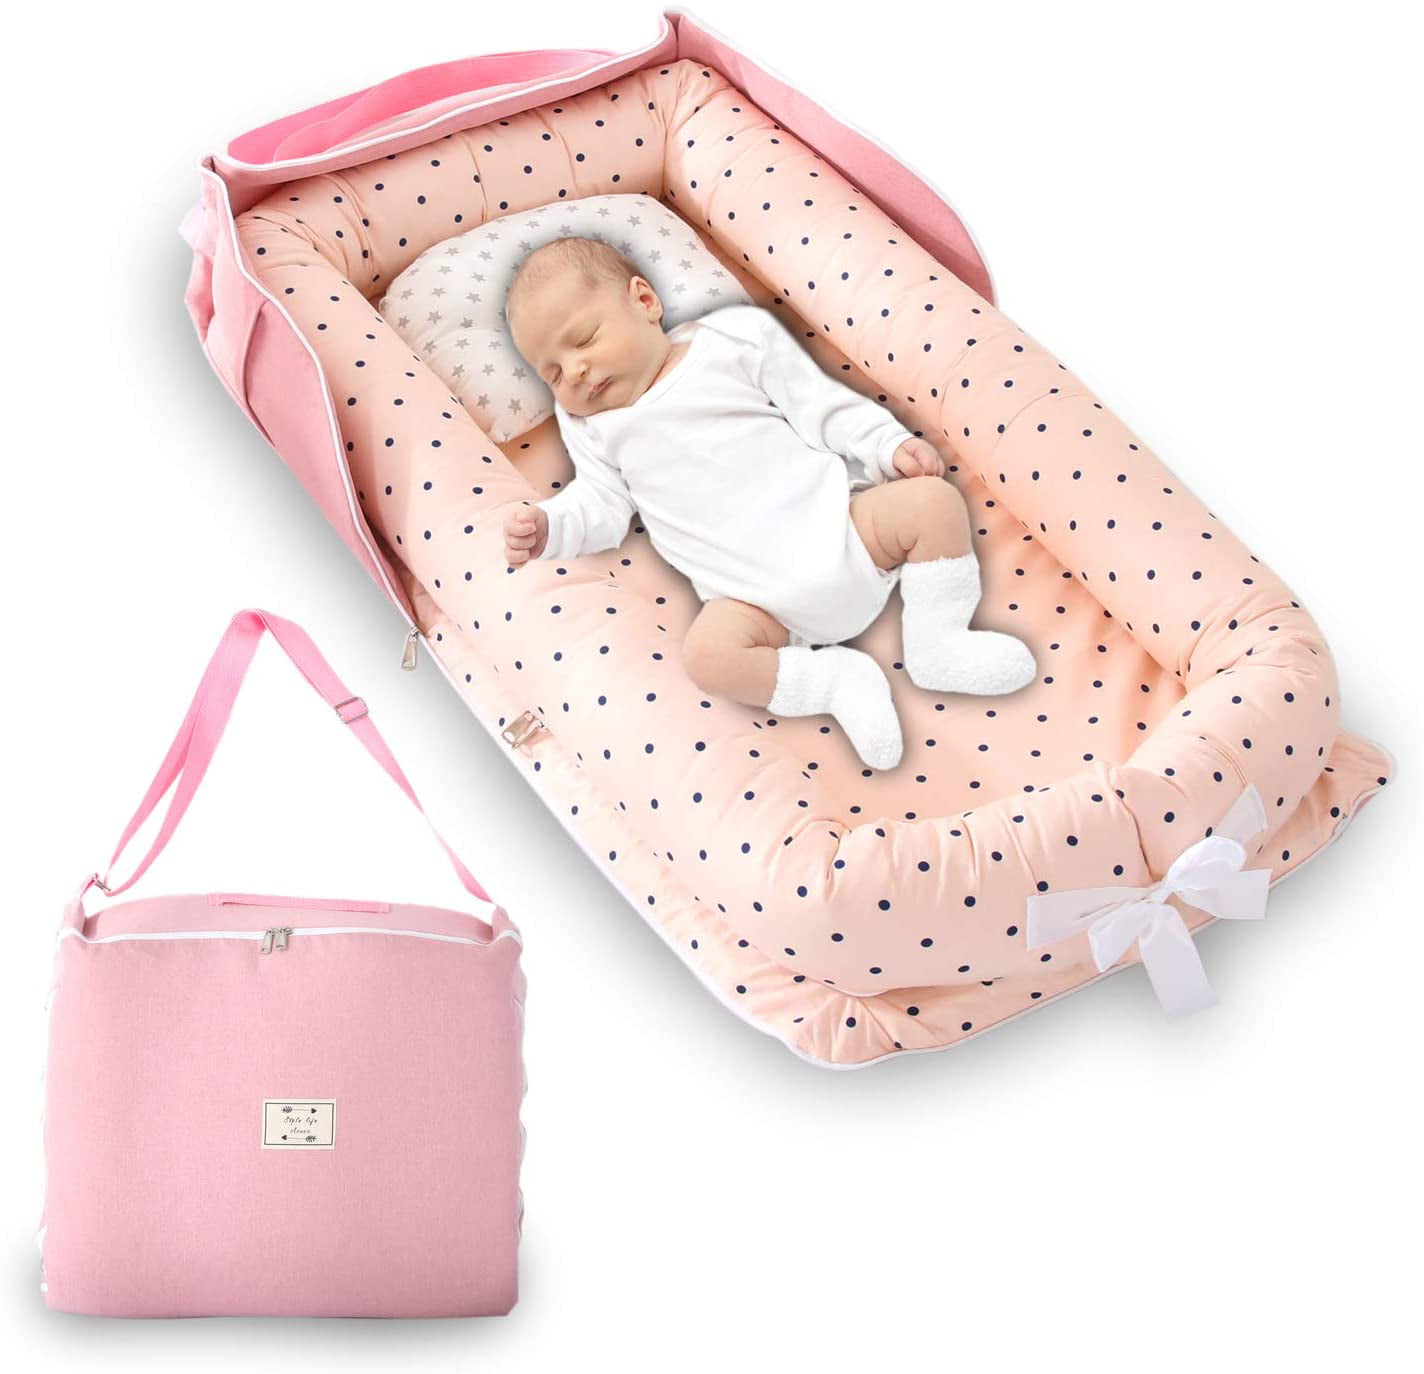 Newborn Baby Bassinets Portable Travel Nest Pod Infant Lounger Sleeper Crib with Canopy Bule